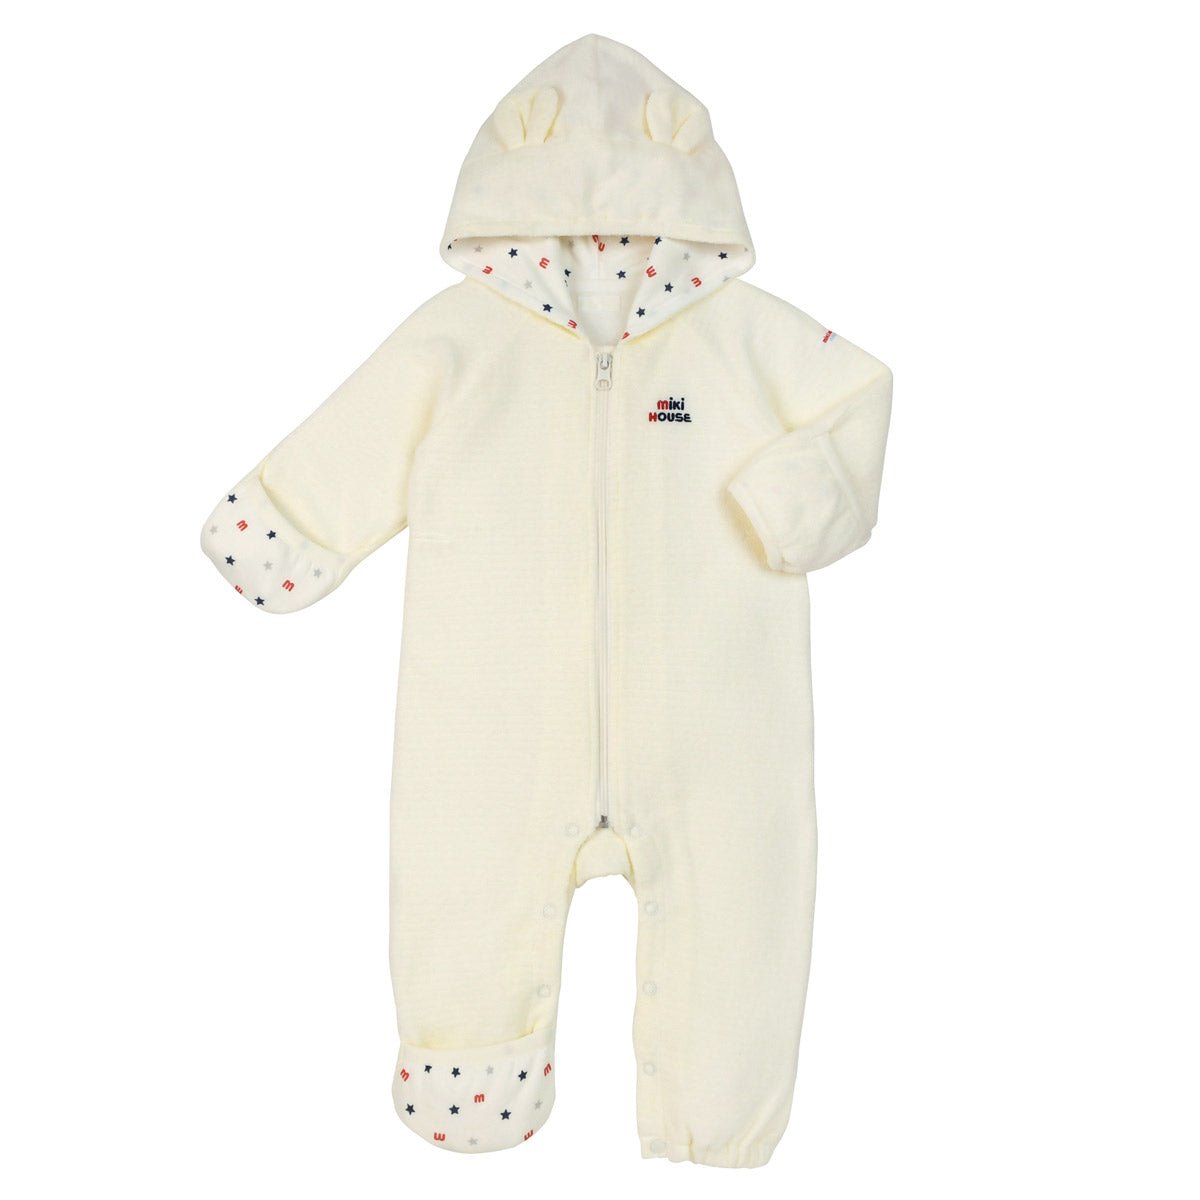 Untwisted Yarn Teddy Bear Coveralls - MIKI HOUSE USA